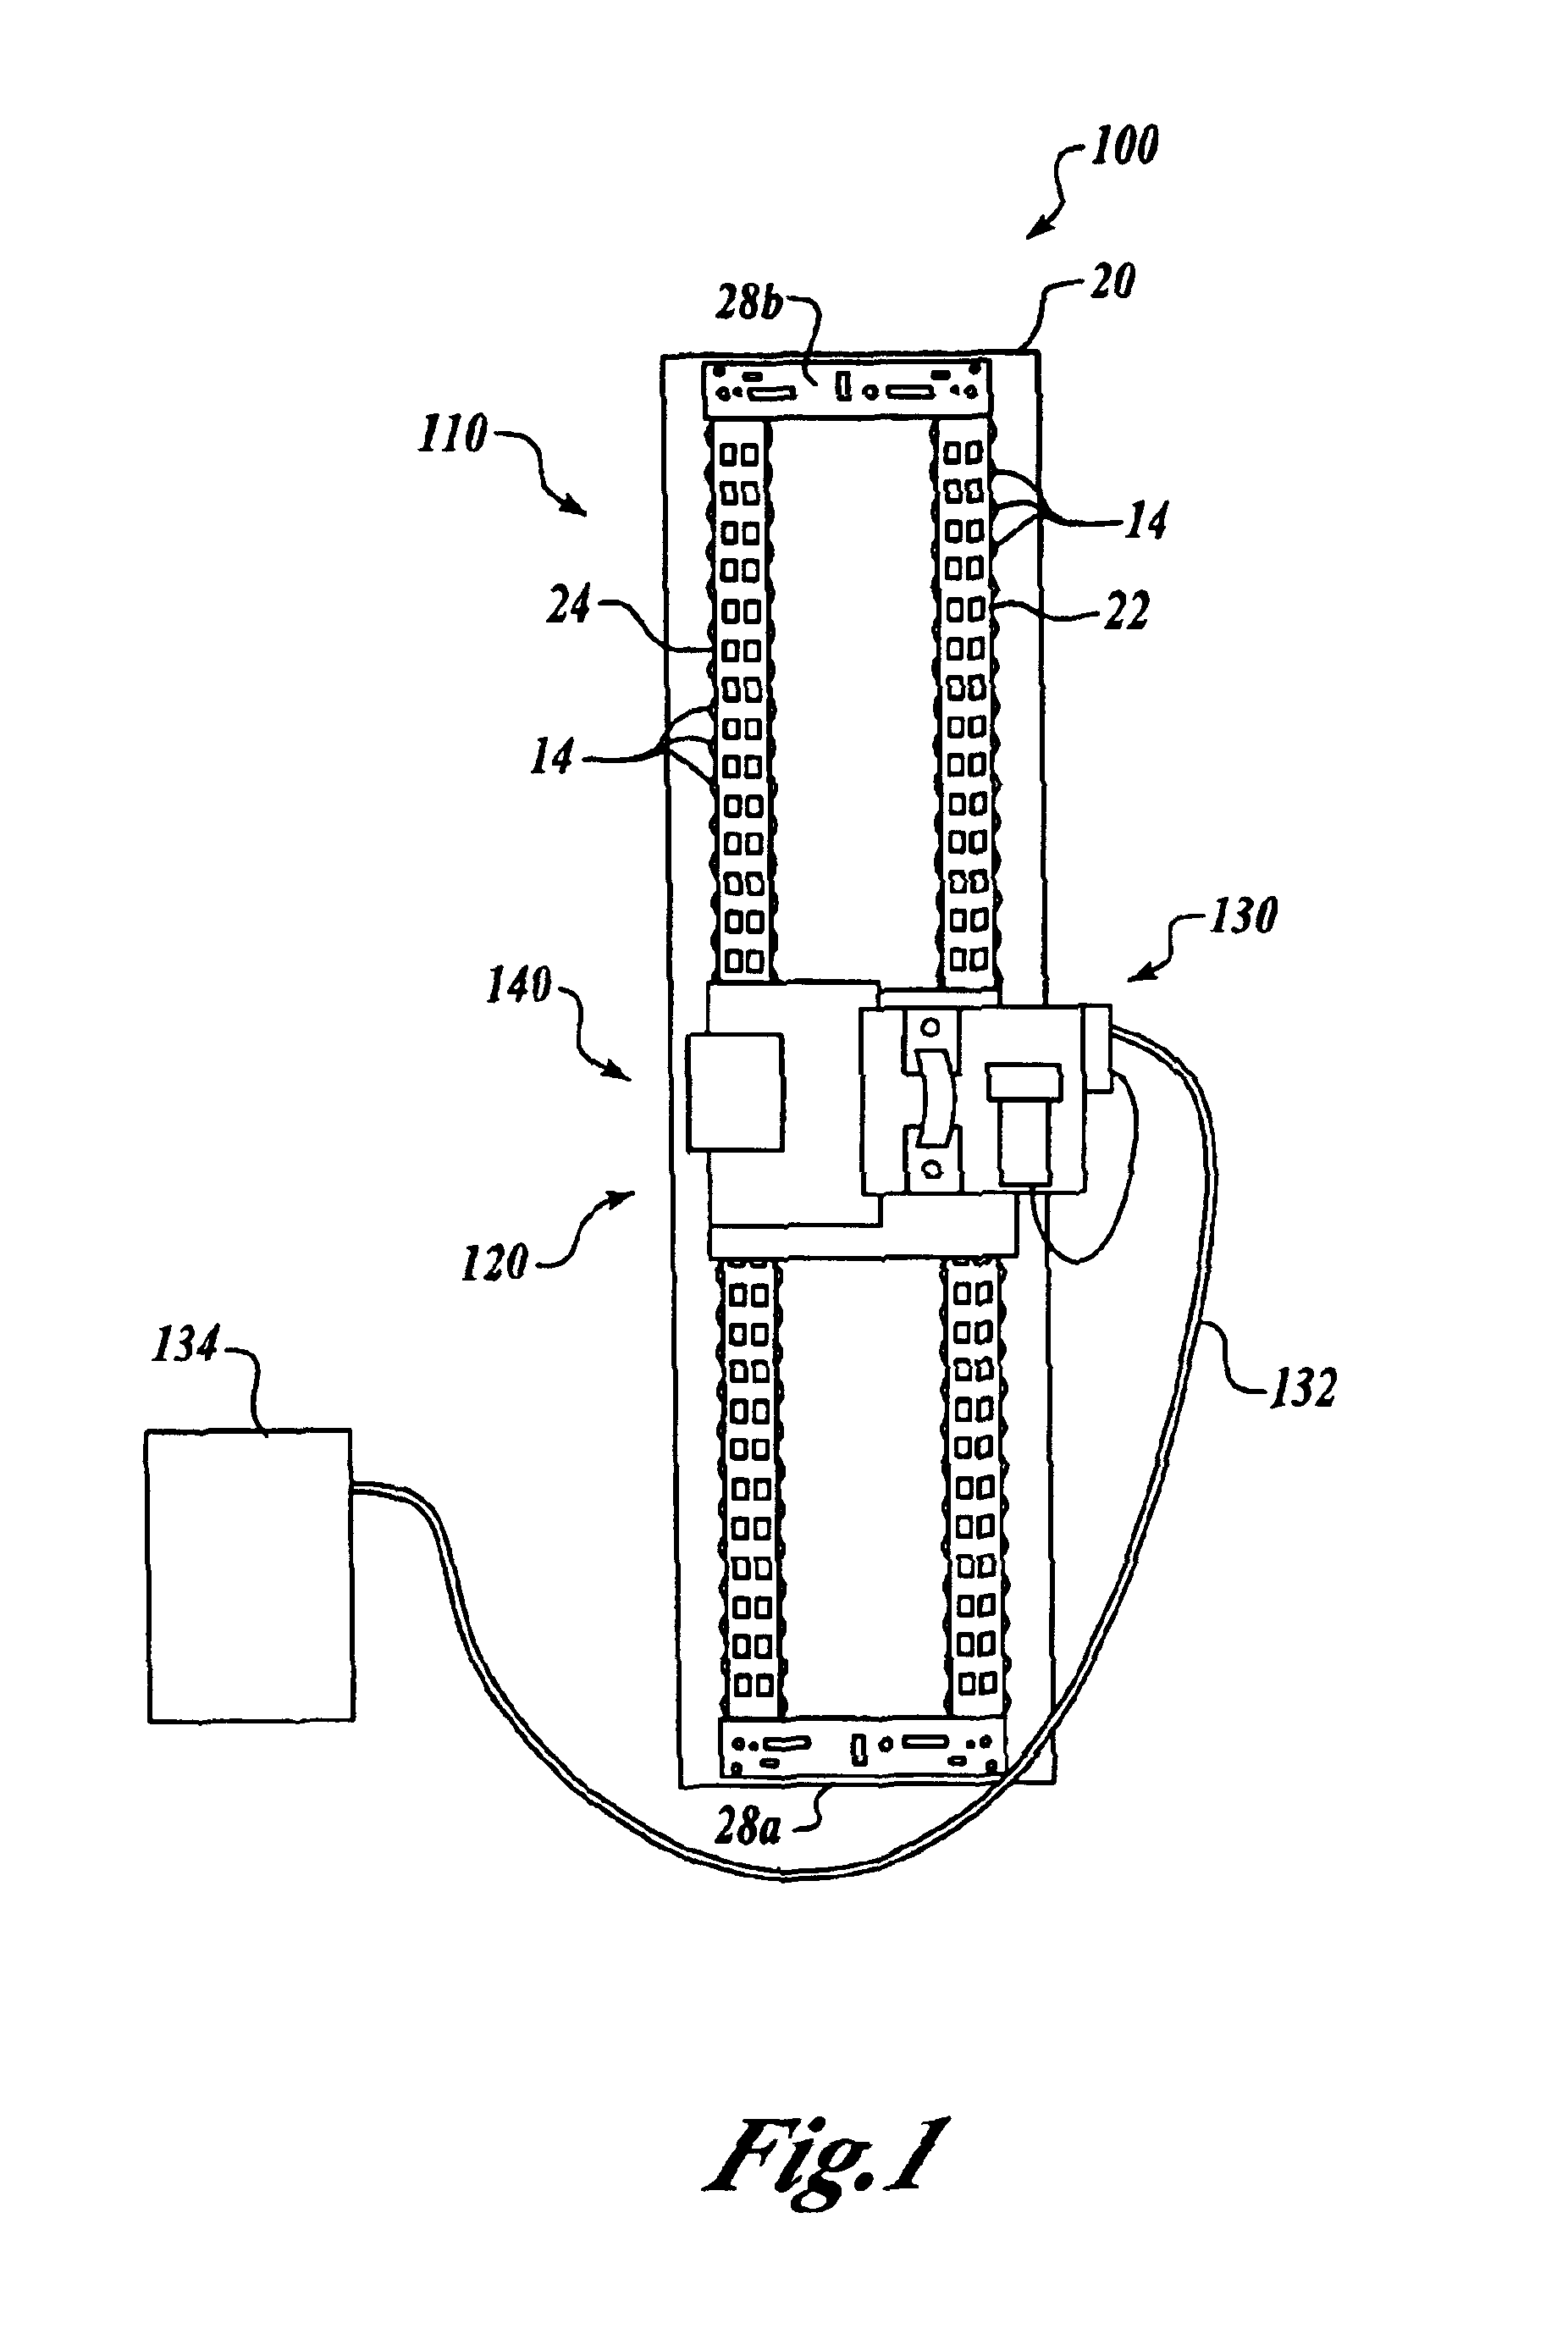 Apparatus for manufacturing operations using non-contact position sensing